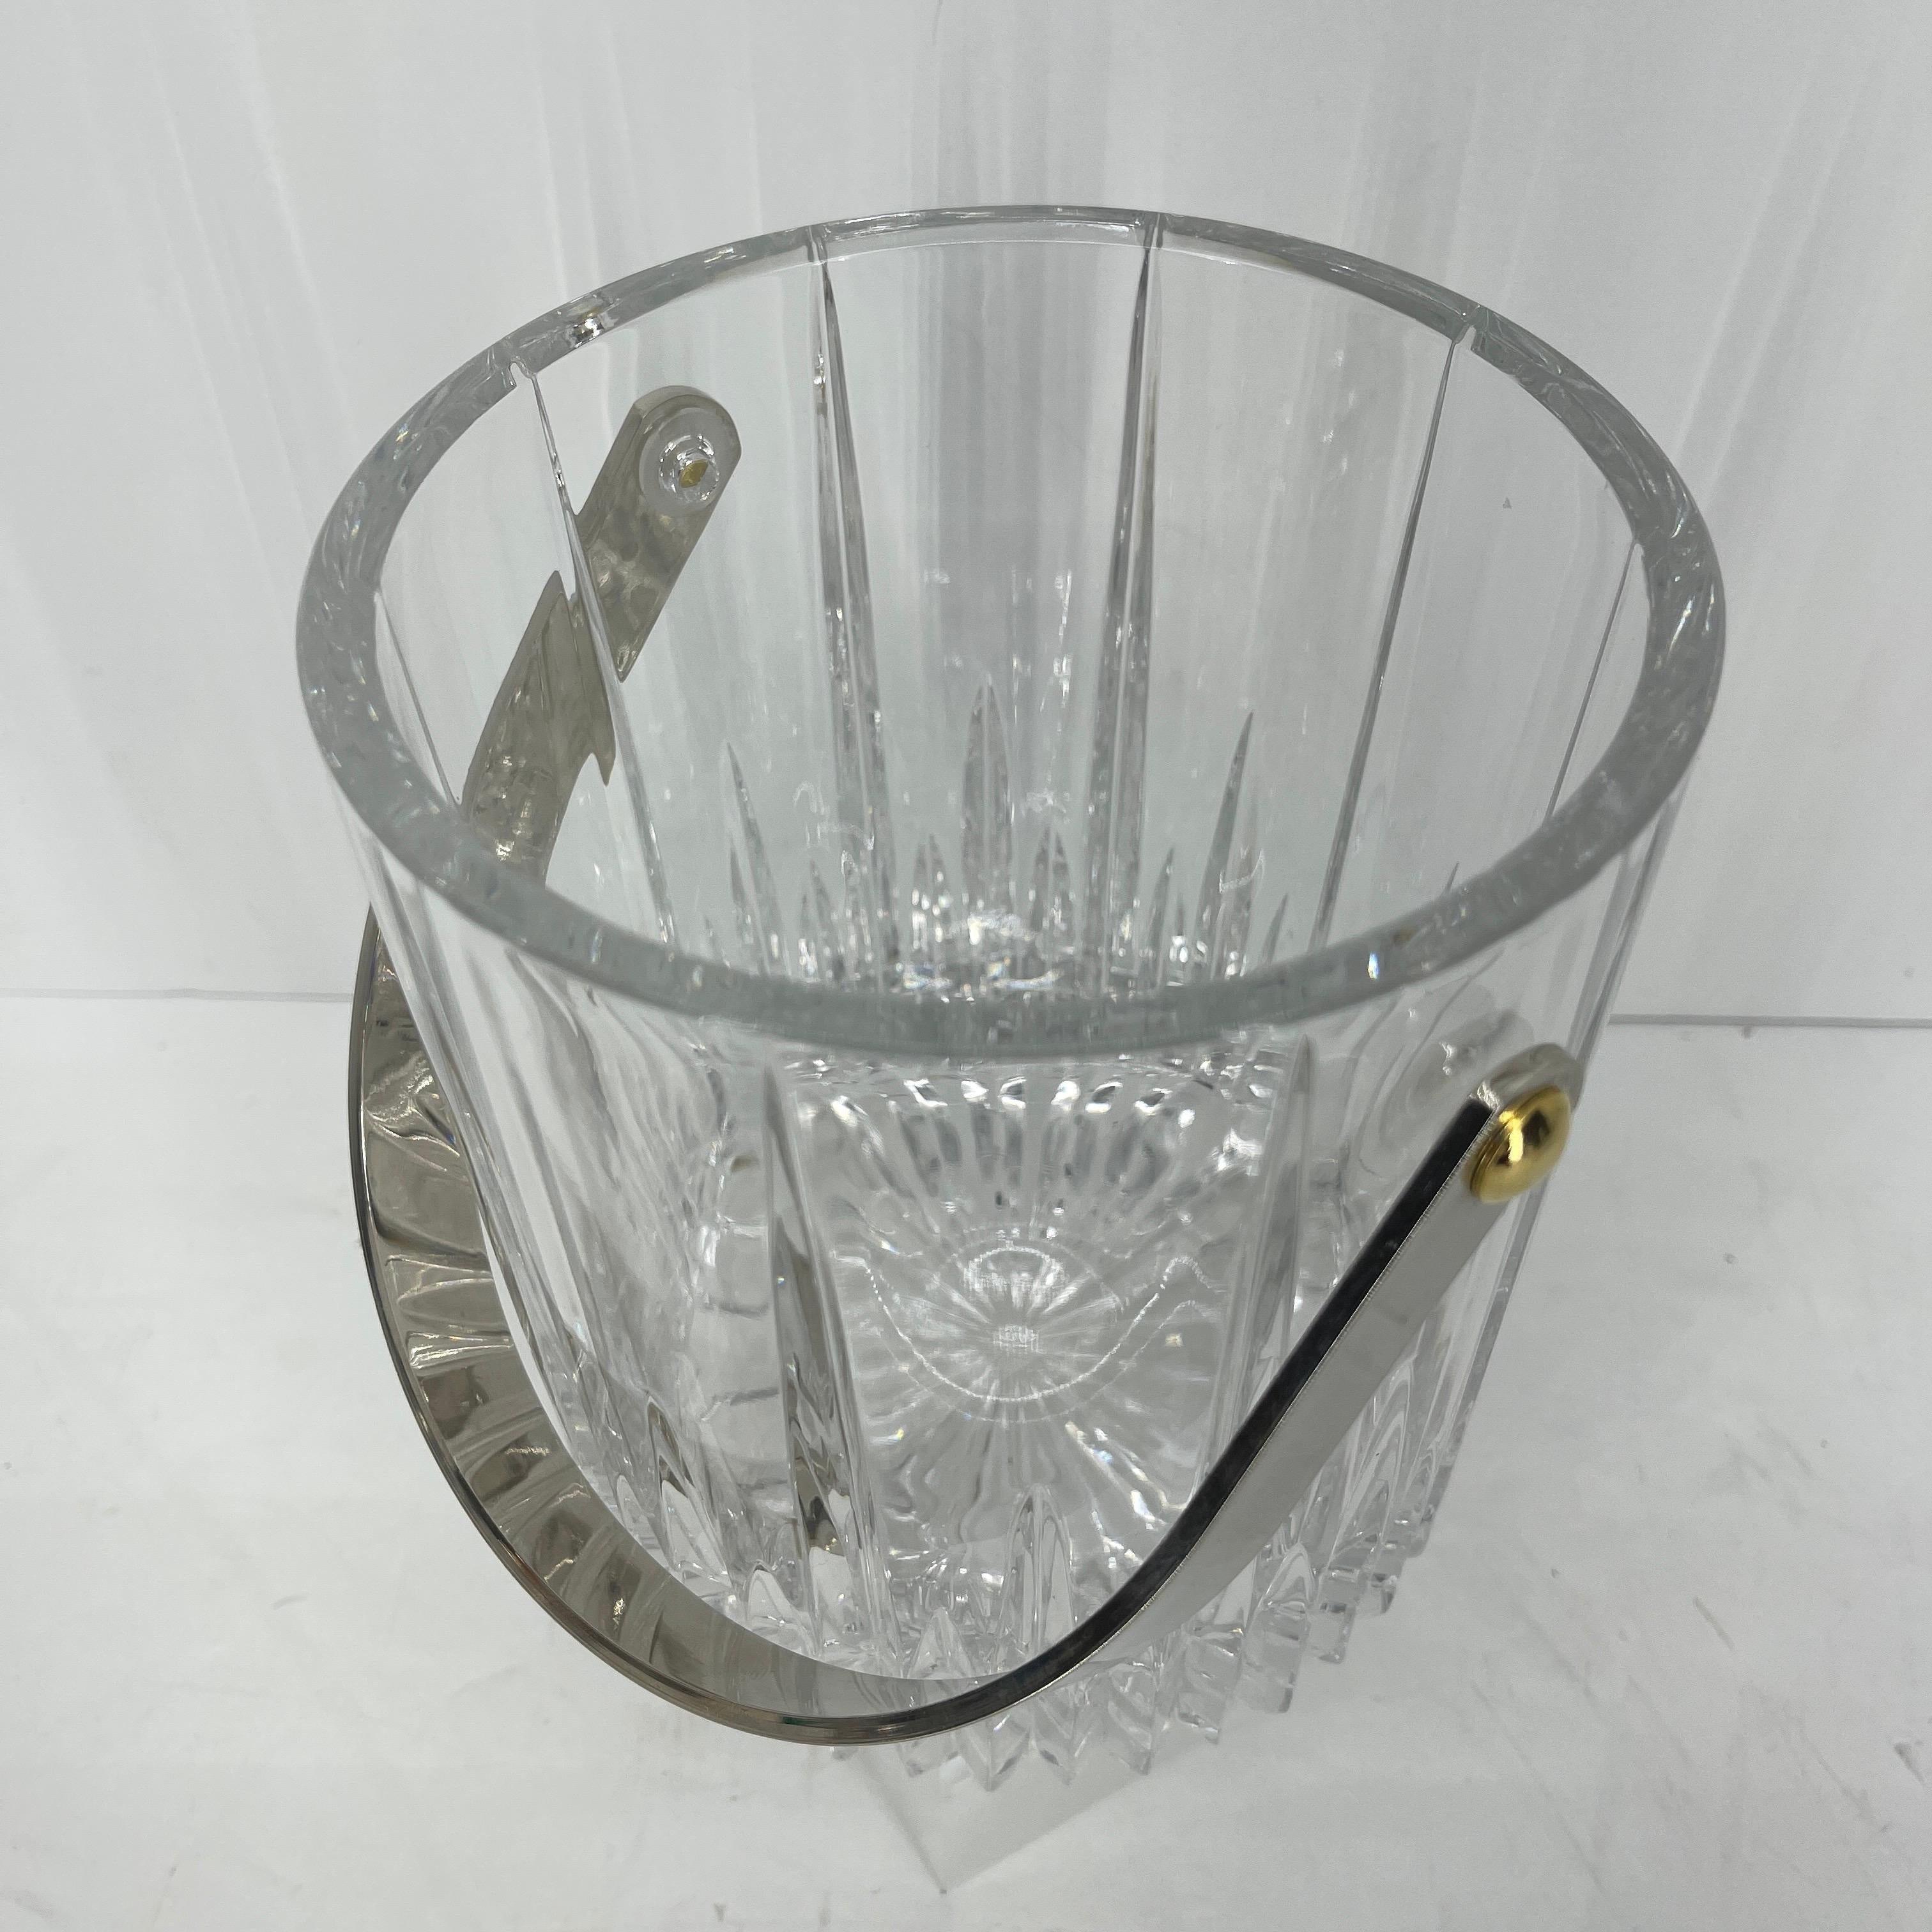 Mid-Century Modern cut crystal ice bucket. This ice bucket in the style of Saint Louis of France has heavy polished chrome handle and brass fittings. The design and shape of the cut crystal shines in the daylight as well as candlelit evenings.